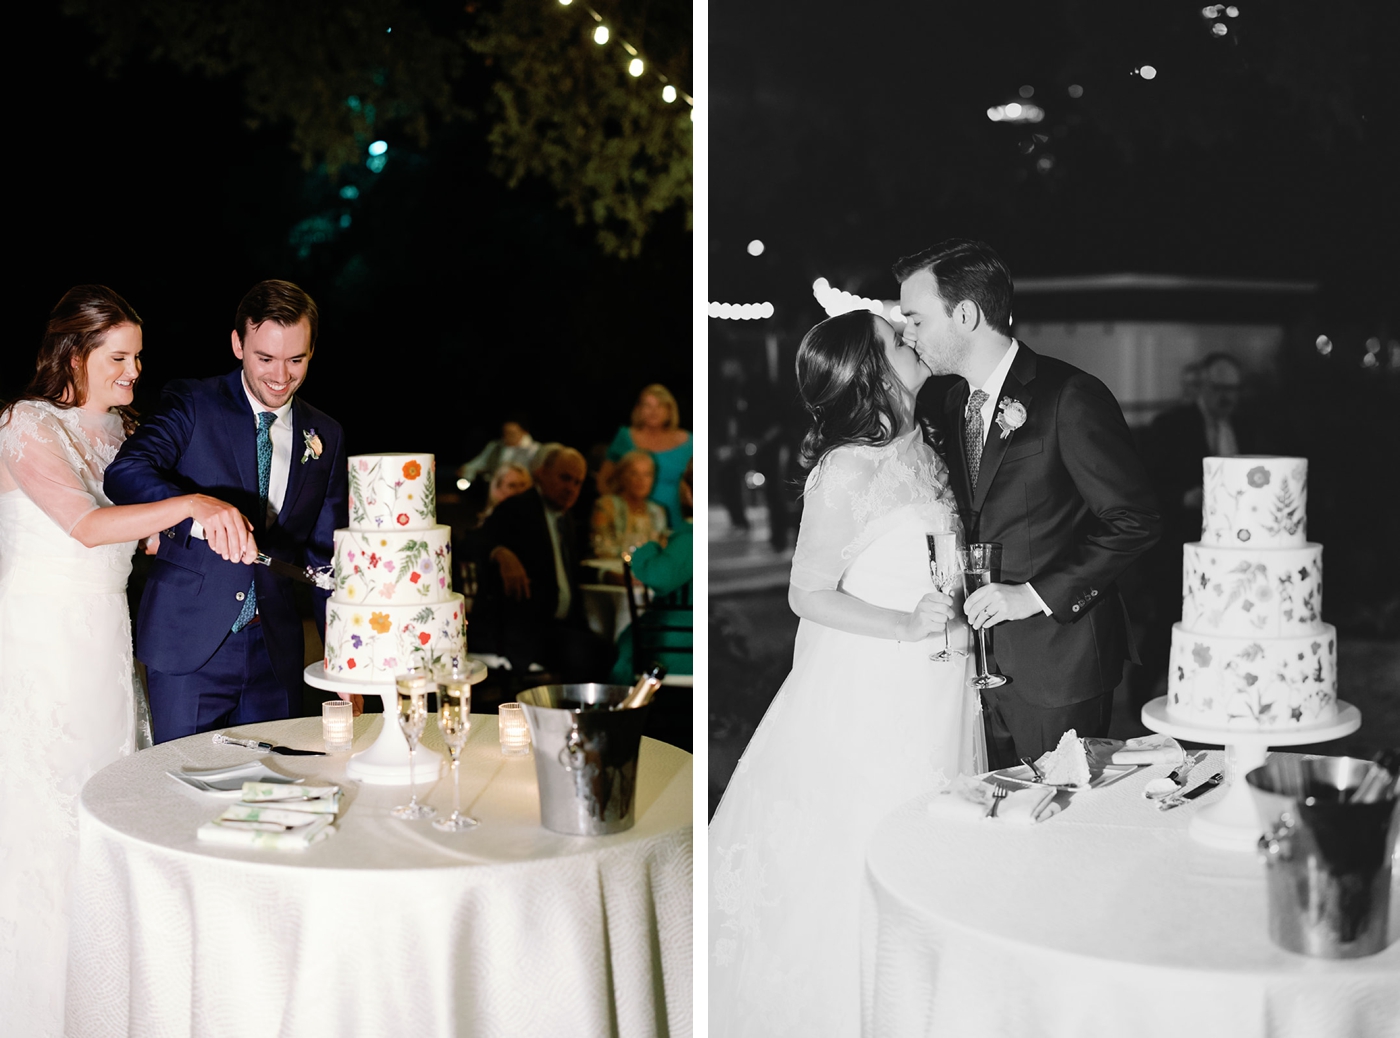 Bride and groom cutting a cake covered in pressed flowers